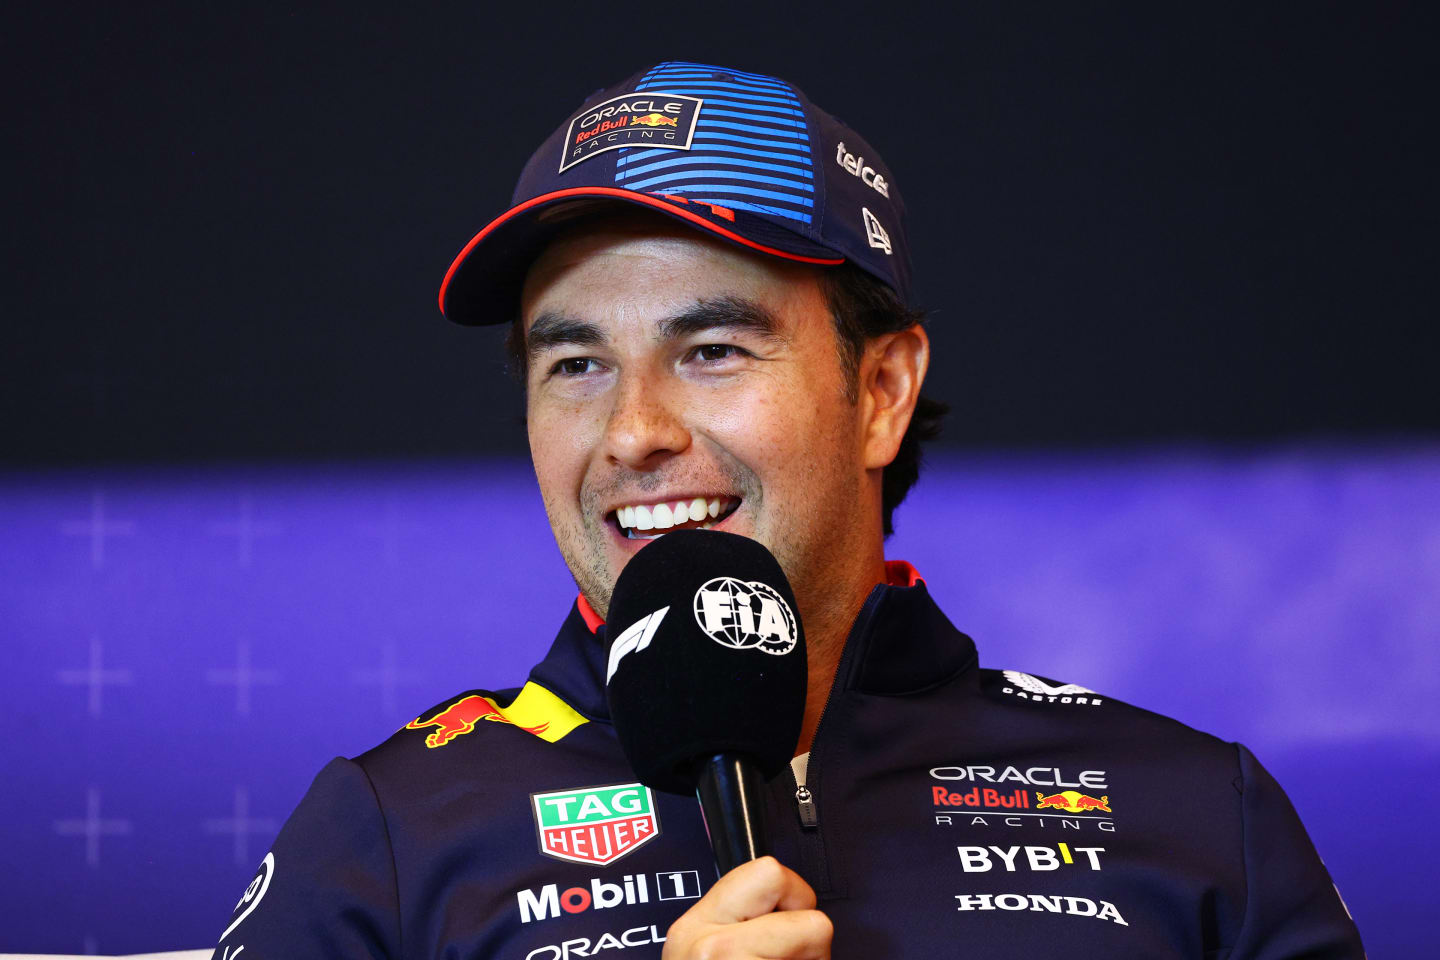 MONTREAL, QUEBEC - JUNE 06: Sergio Perez of Mexico and Oracle Red Bull Racing attends the press conference during previews ahead of the F1 Grand Prix of Canada at Circuit Gilles Villeneuve on June 06, 2024 in Montreal, Quebec. (Photo by Clive Rose/Getty Images)